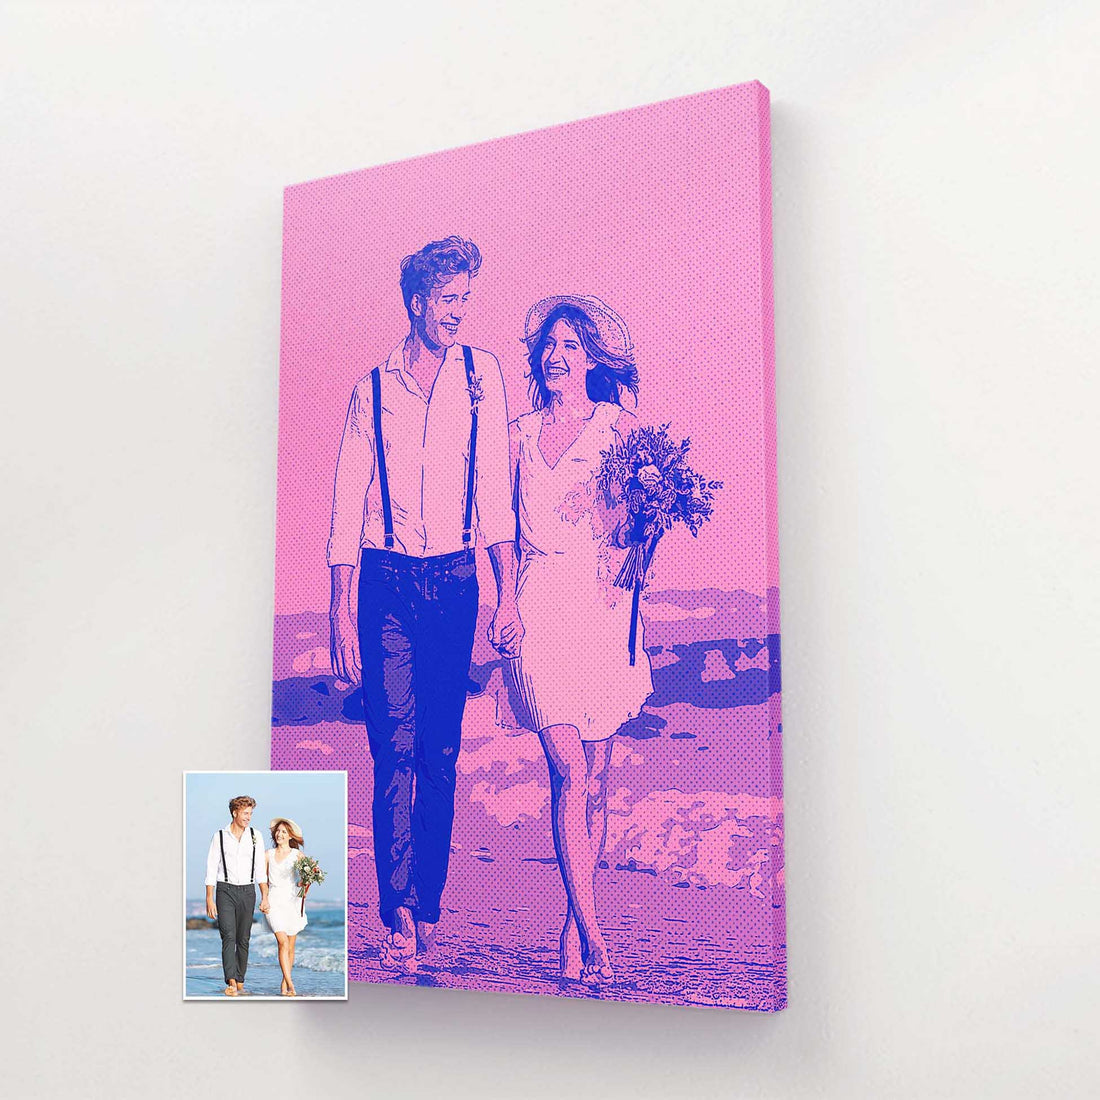 Our Personalised Purple & Pink Comics Cartoon Canvas allow you to showcase your individuality and creativity. By adding your own personal touch to your decor, you can create a space that truly reflects your style and personality.